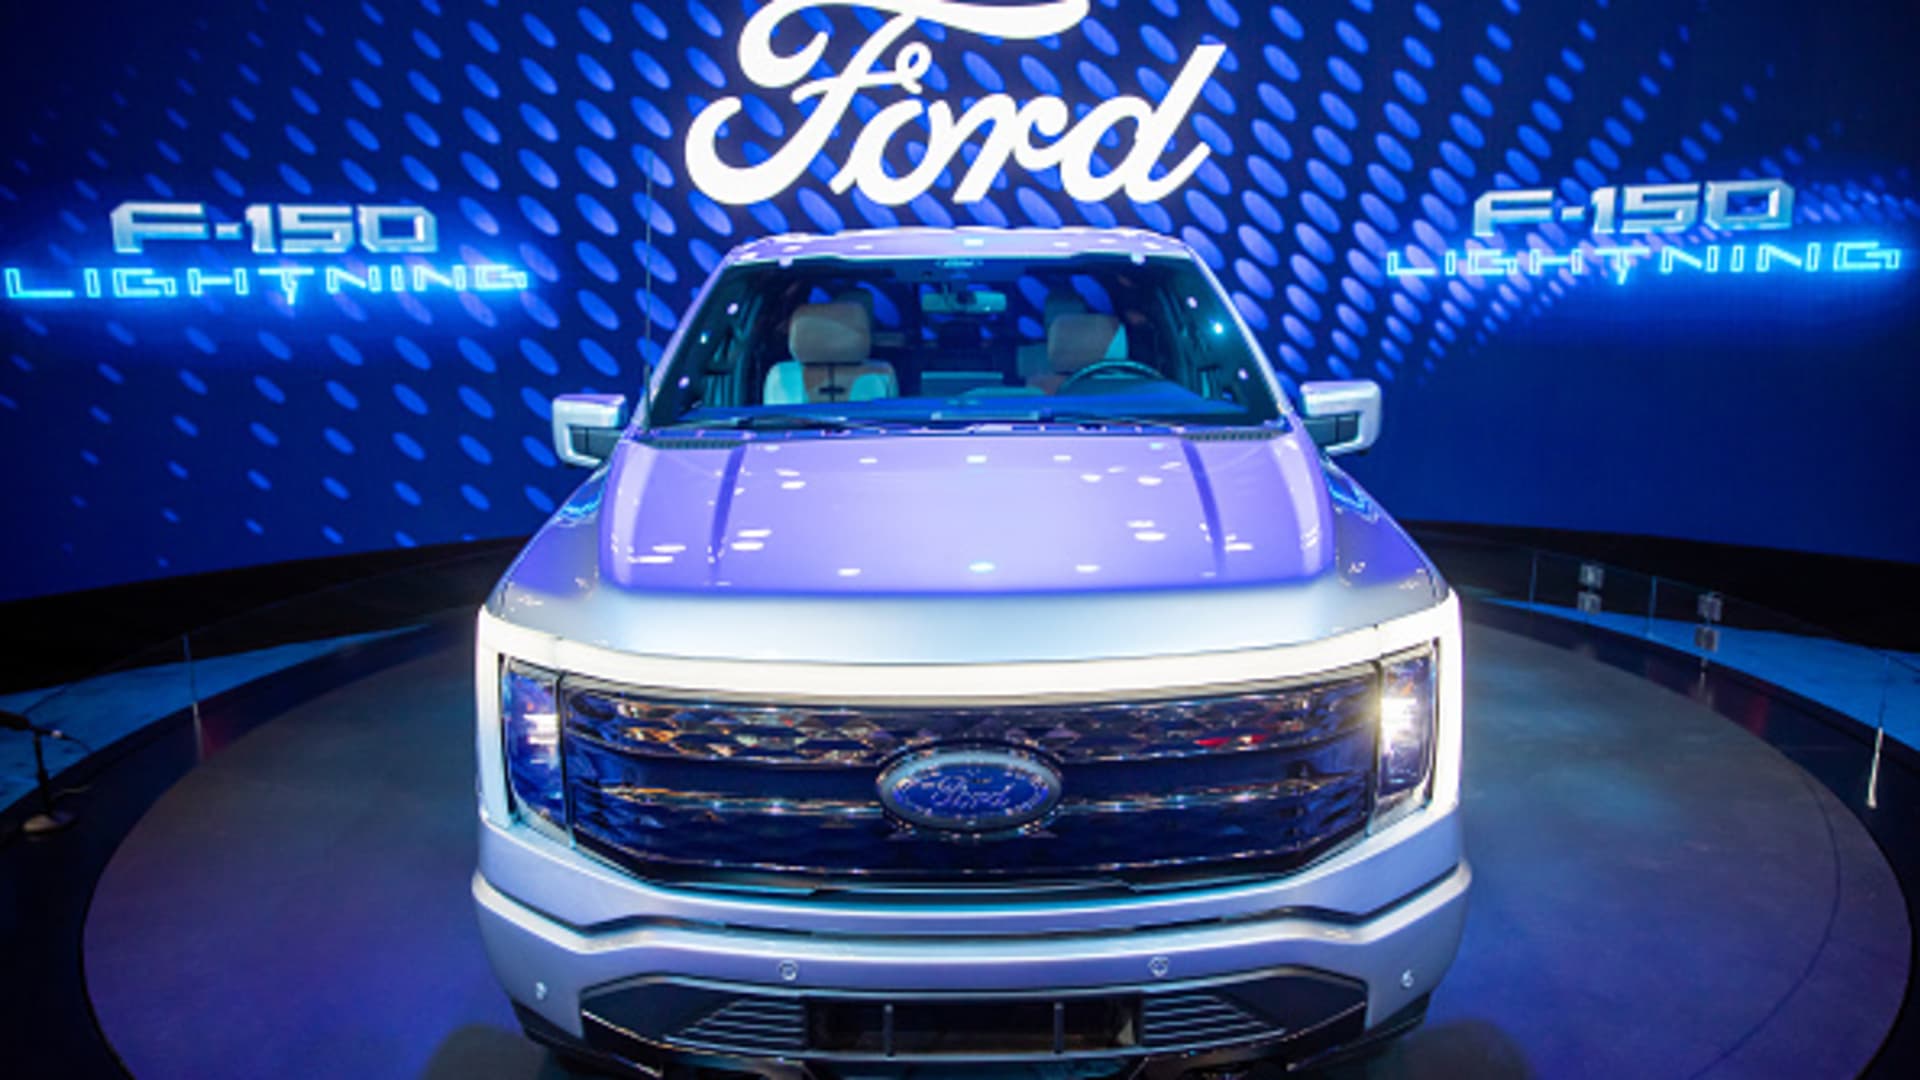 Stocks making the biggest moves midday: Ford, Marvell Technology, Paramount, Gap and more